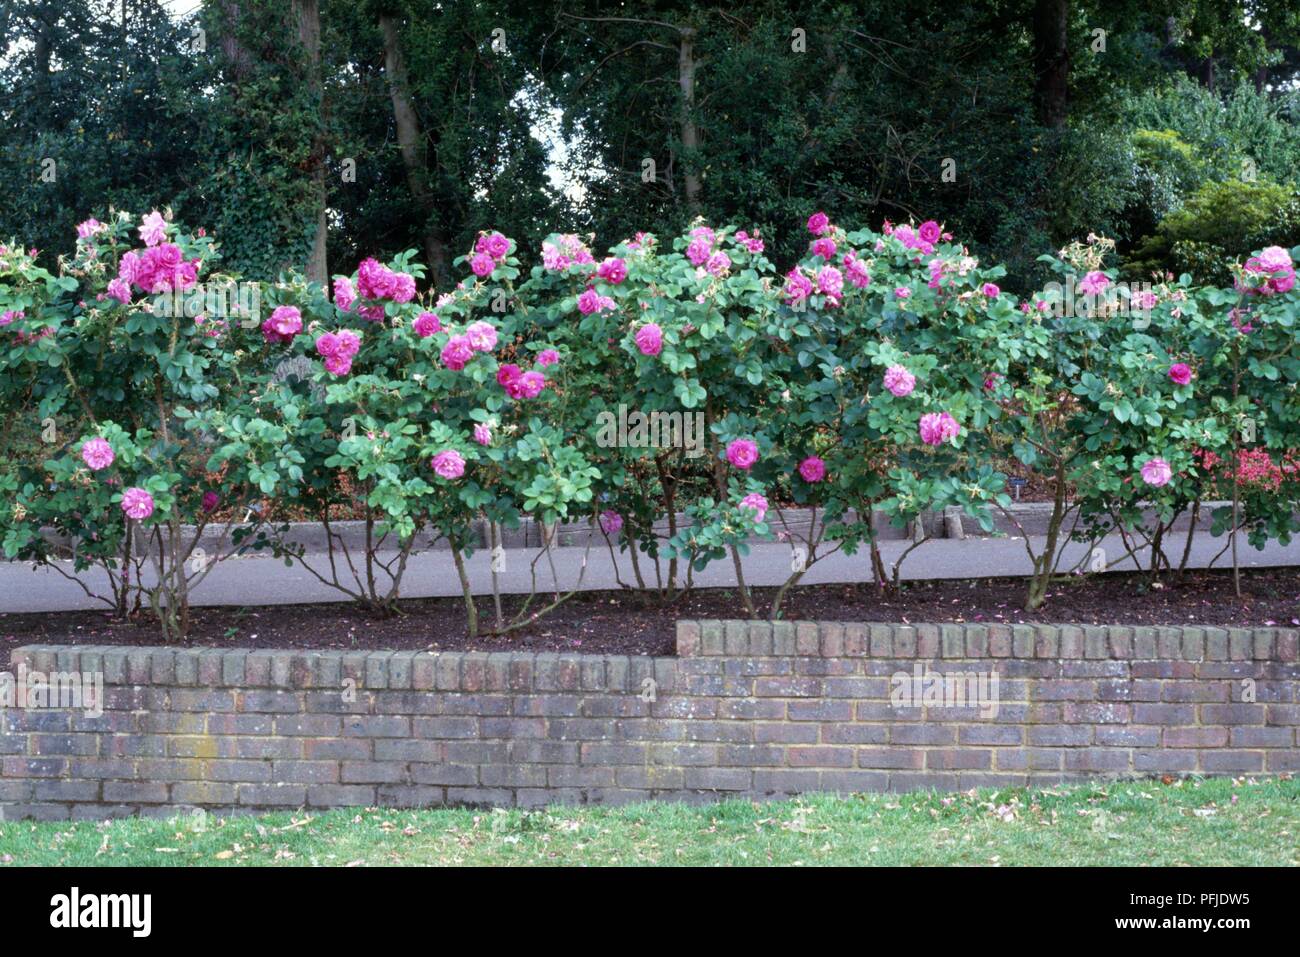 Flowering hedge of Rosa rugosa with dark pink flowers and green leaves growing in row next to low brick wall Stock Photo